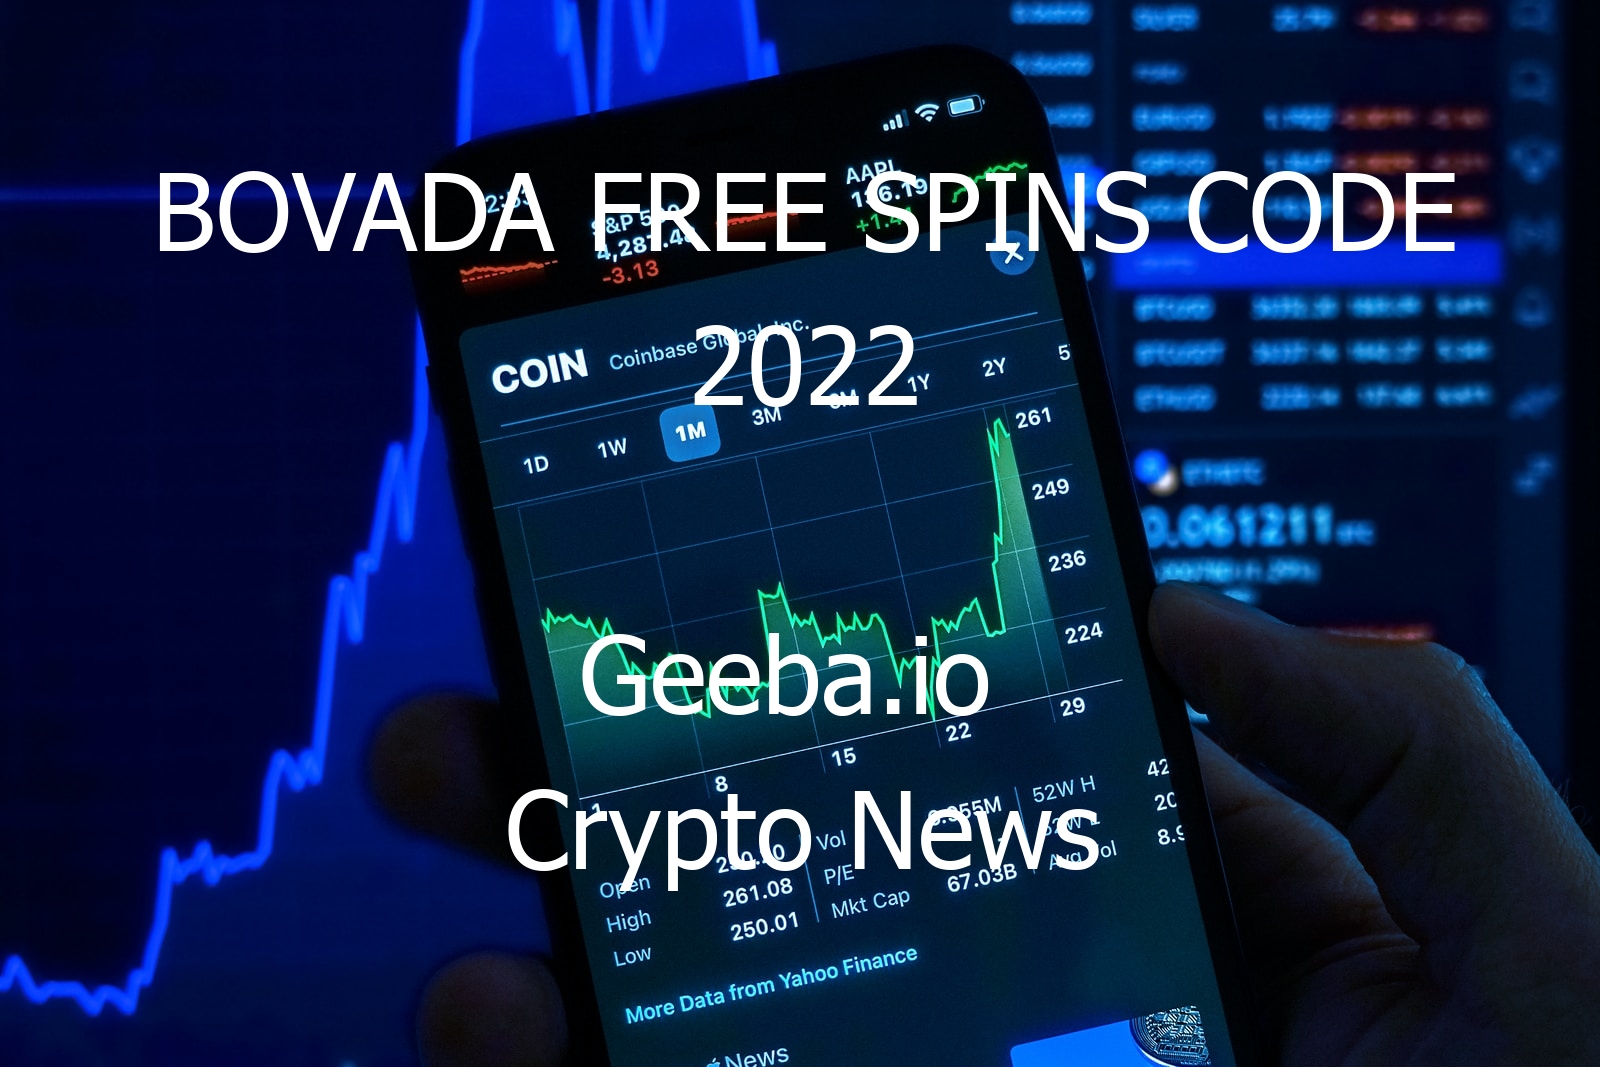 bovada free spins code 2022 1965